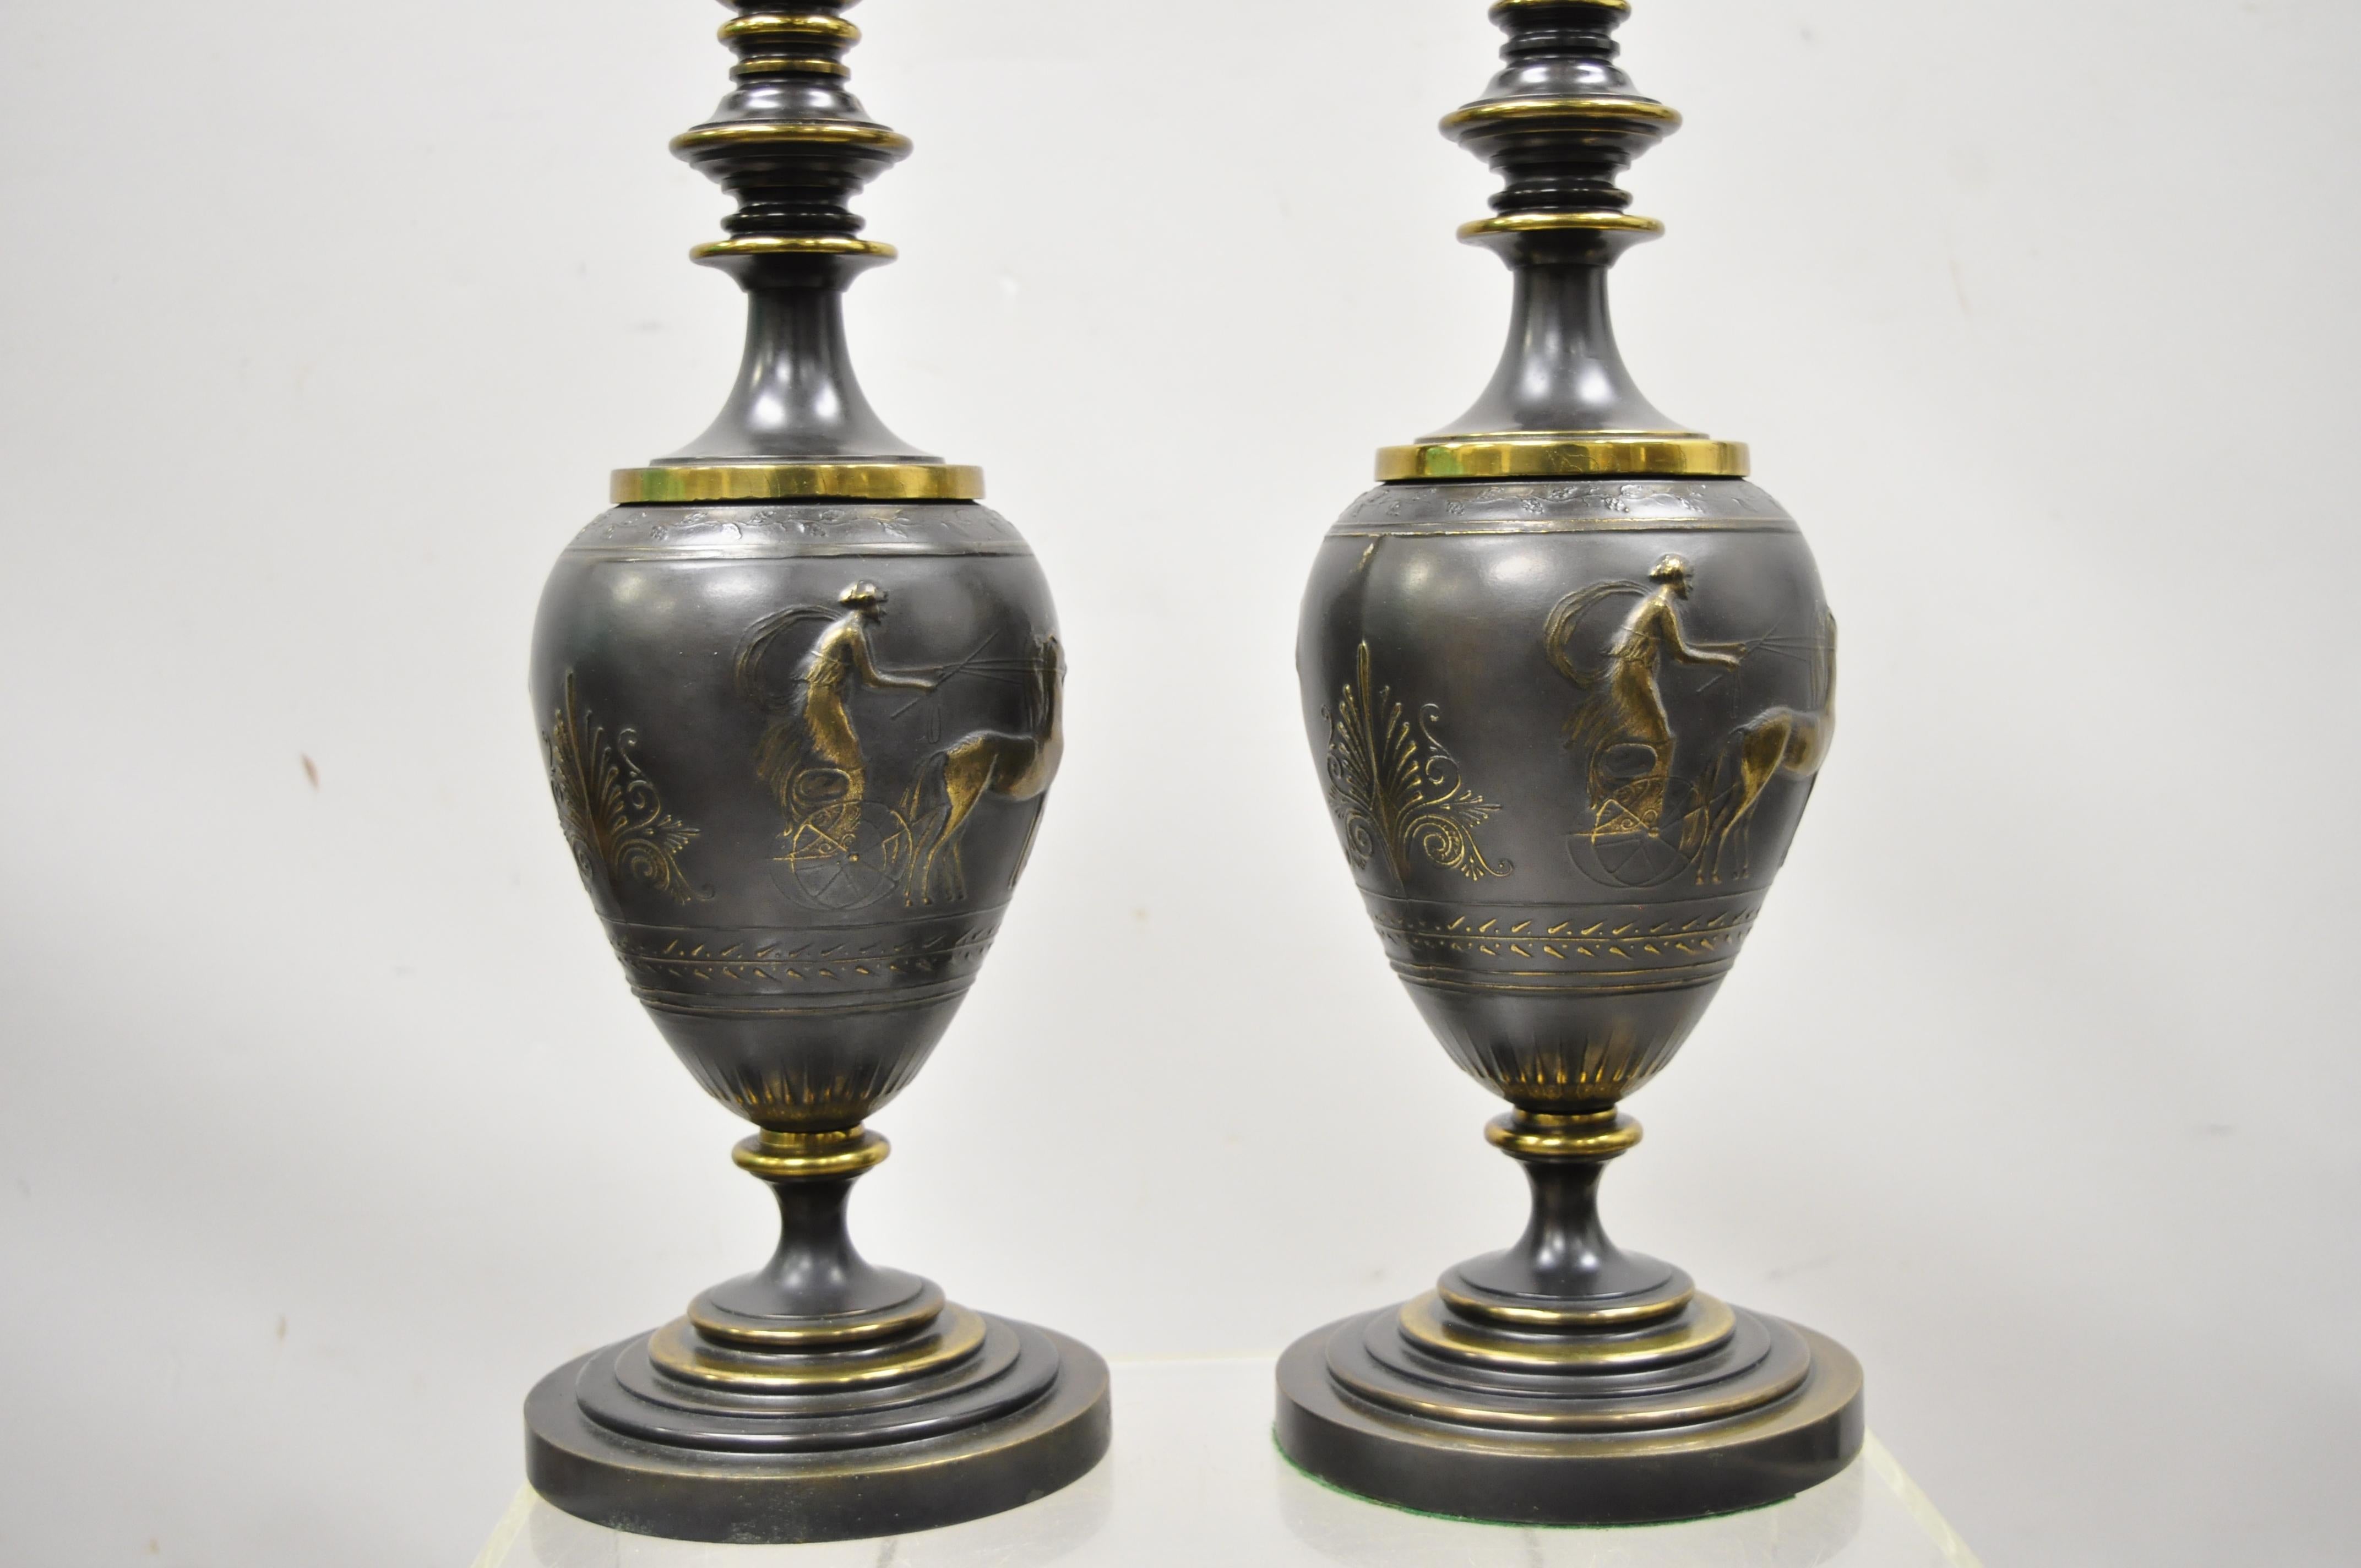 Antique Italian classical bronze finish metal bulbous empire style figural table lamps, a pair. Item features figural classical bulbous bodies with chariot riders, 3-light sockets, brass accents, very nice antique pair, circa early to mid-20th